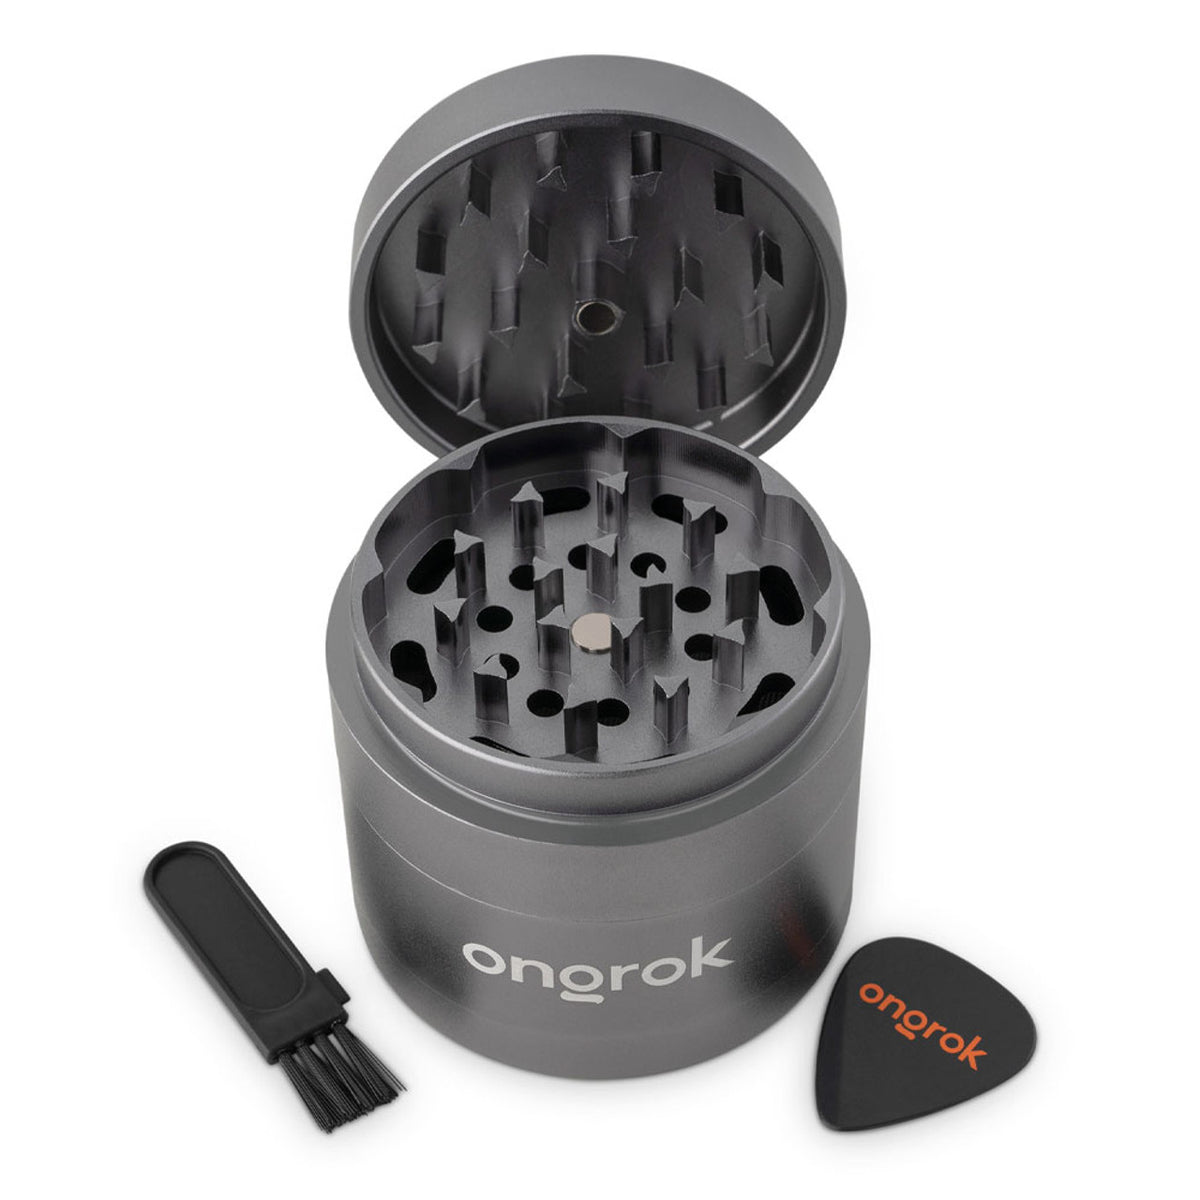 ONGROK 5 Piece Grinder - Mr. Bill's Pipe & Tobacco Company